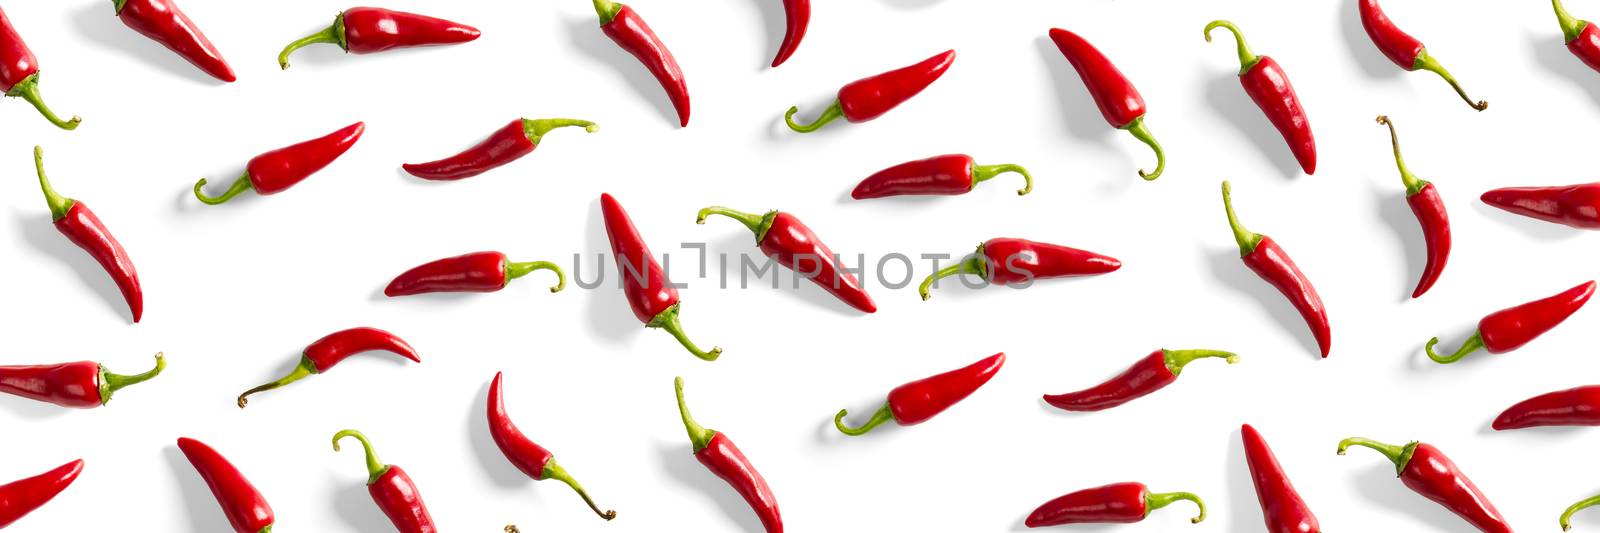 Creative background made of red chili or chilli on white backdrop. Minimal food backgroud. Red hot chilli peppers background. by PhotoTime